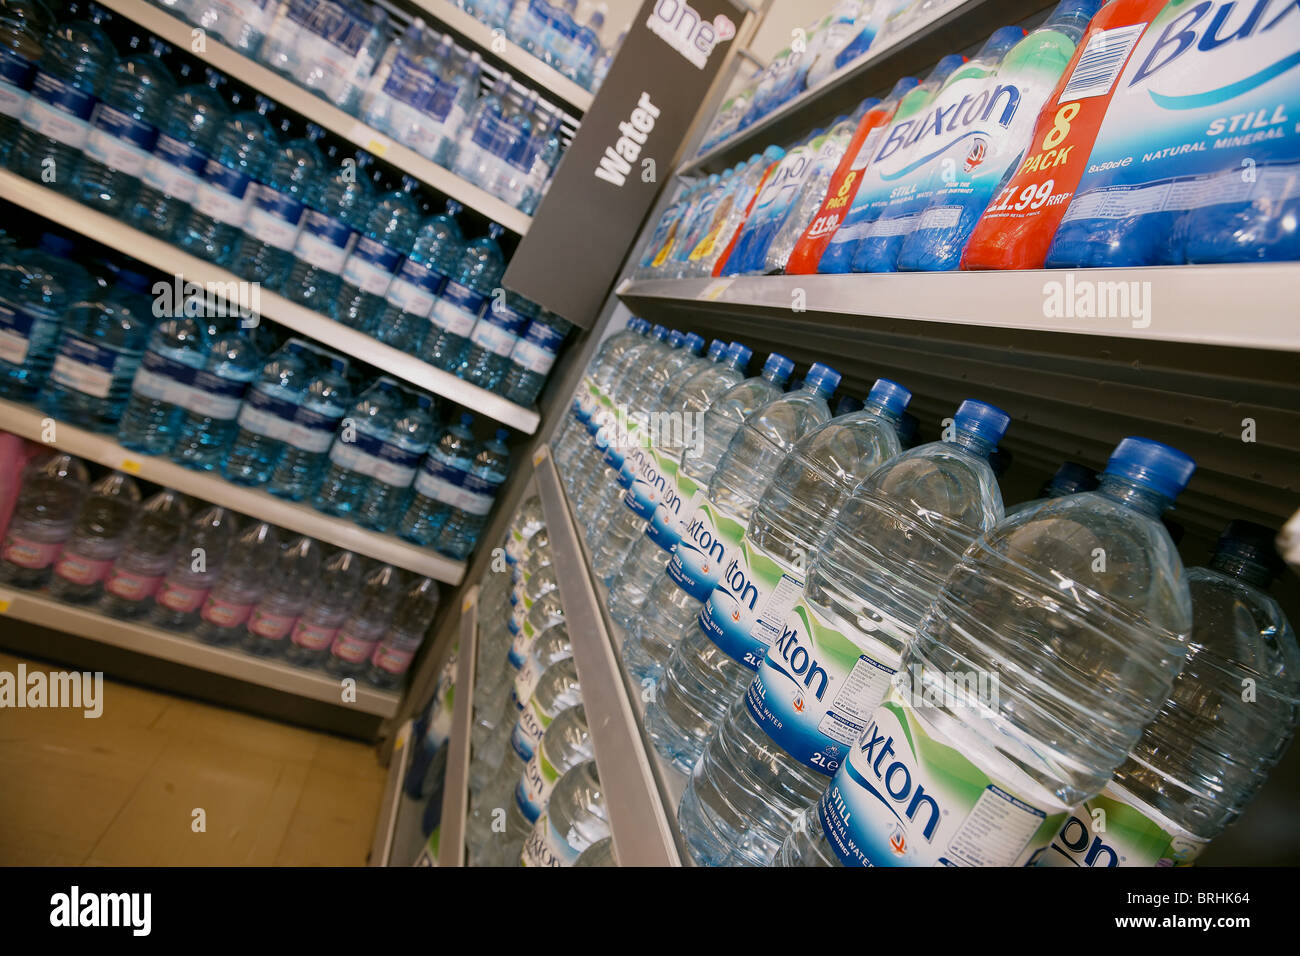 Bottled mineral water for sale in a supermarket stacked on shelf, UK Stock Photo